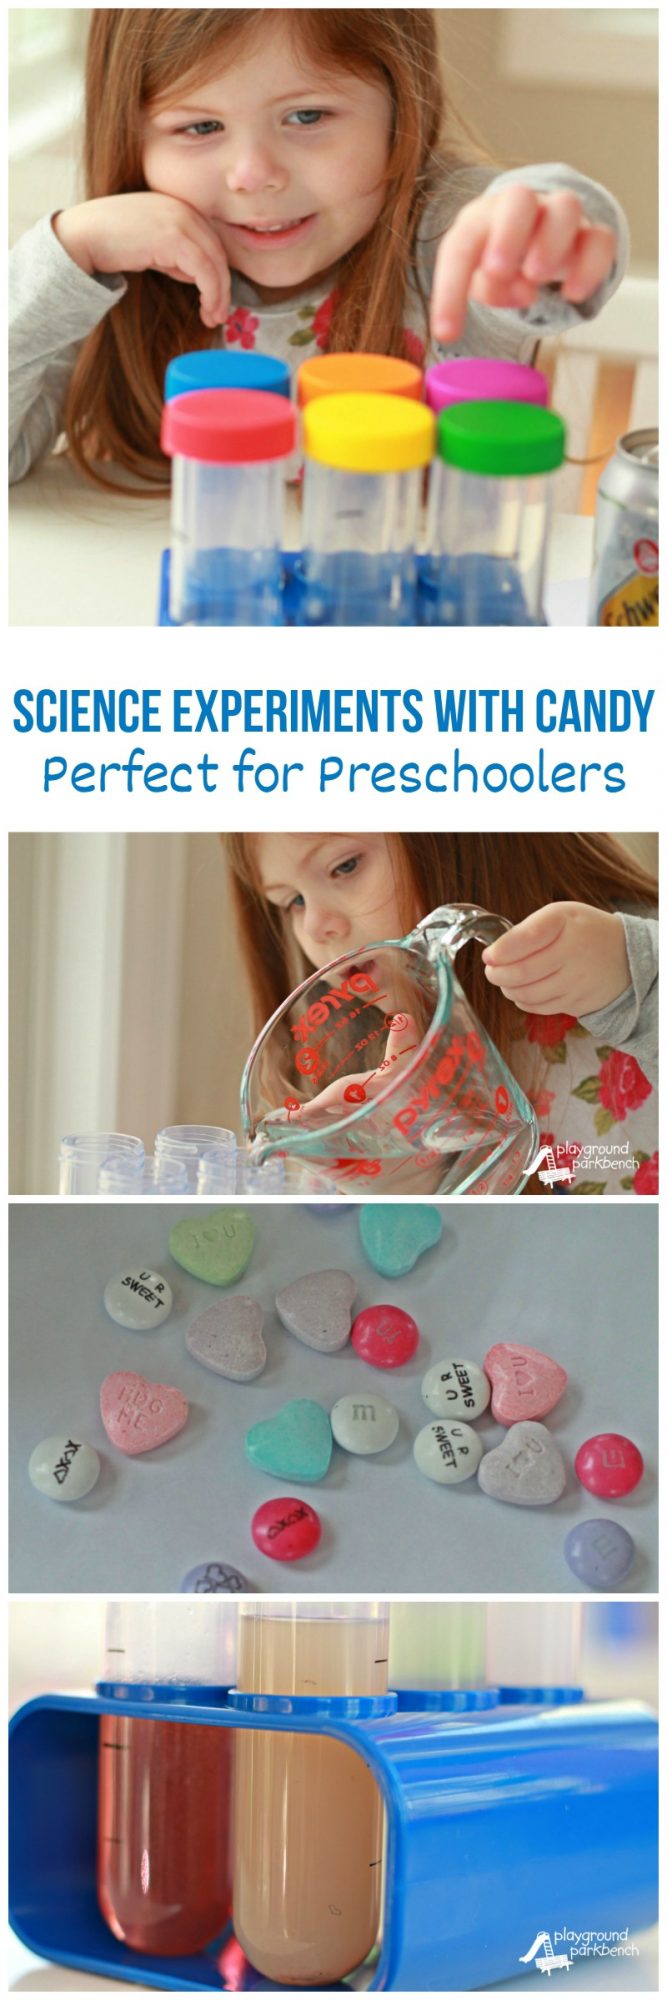 Science Experiments with Candy for Preschoolers